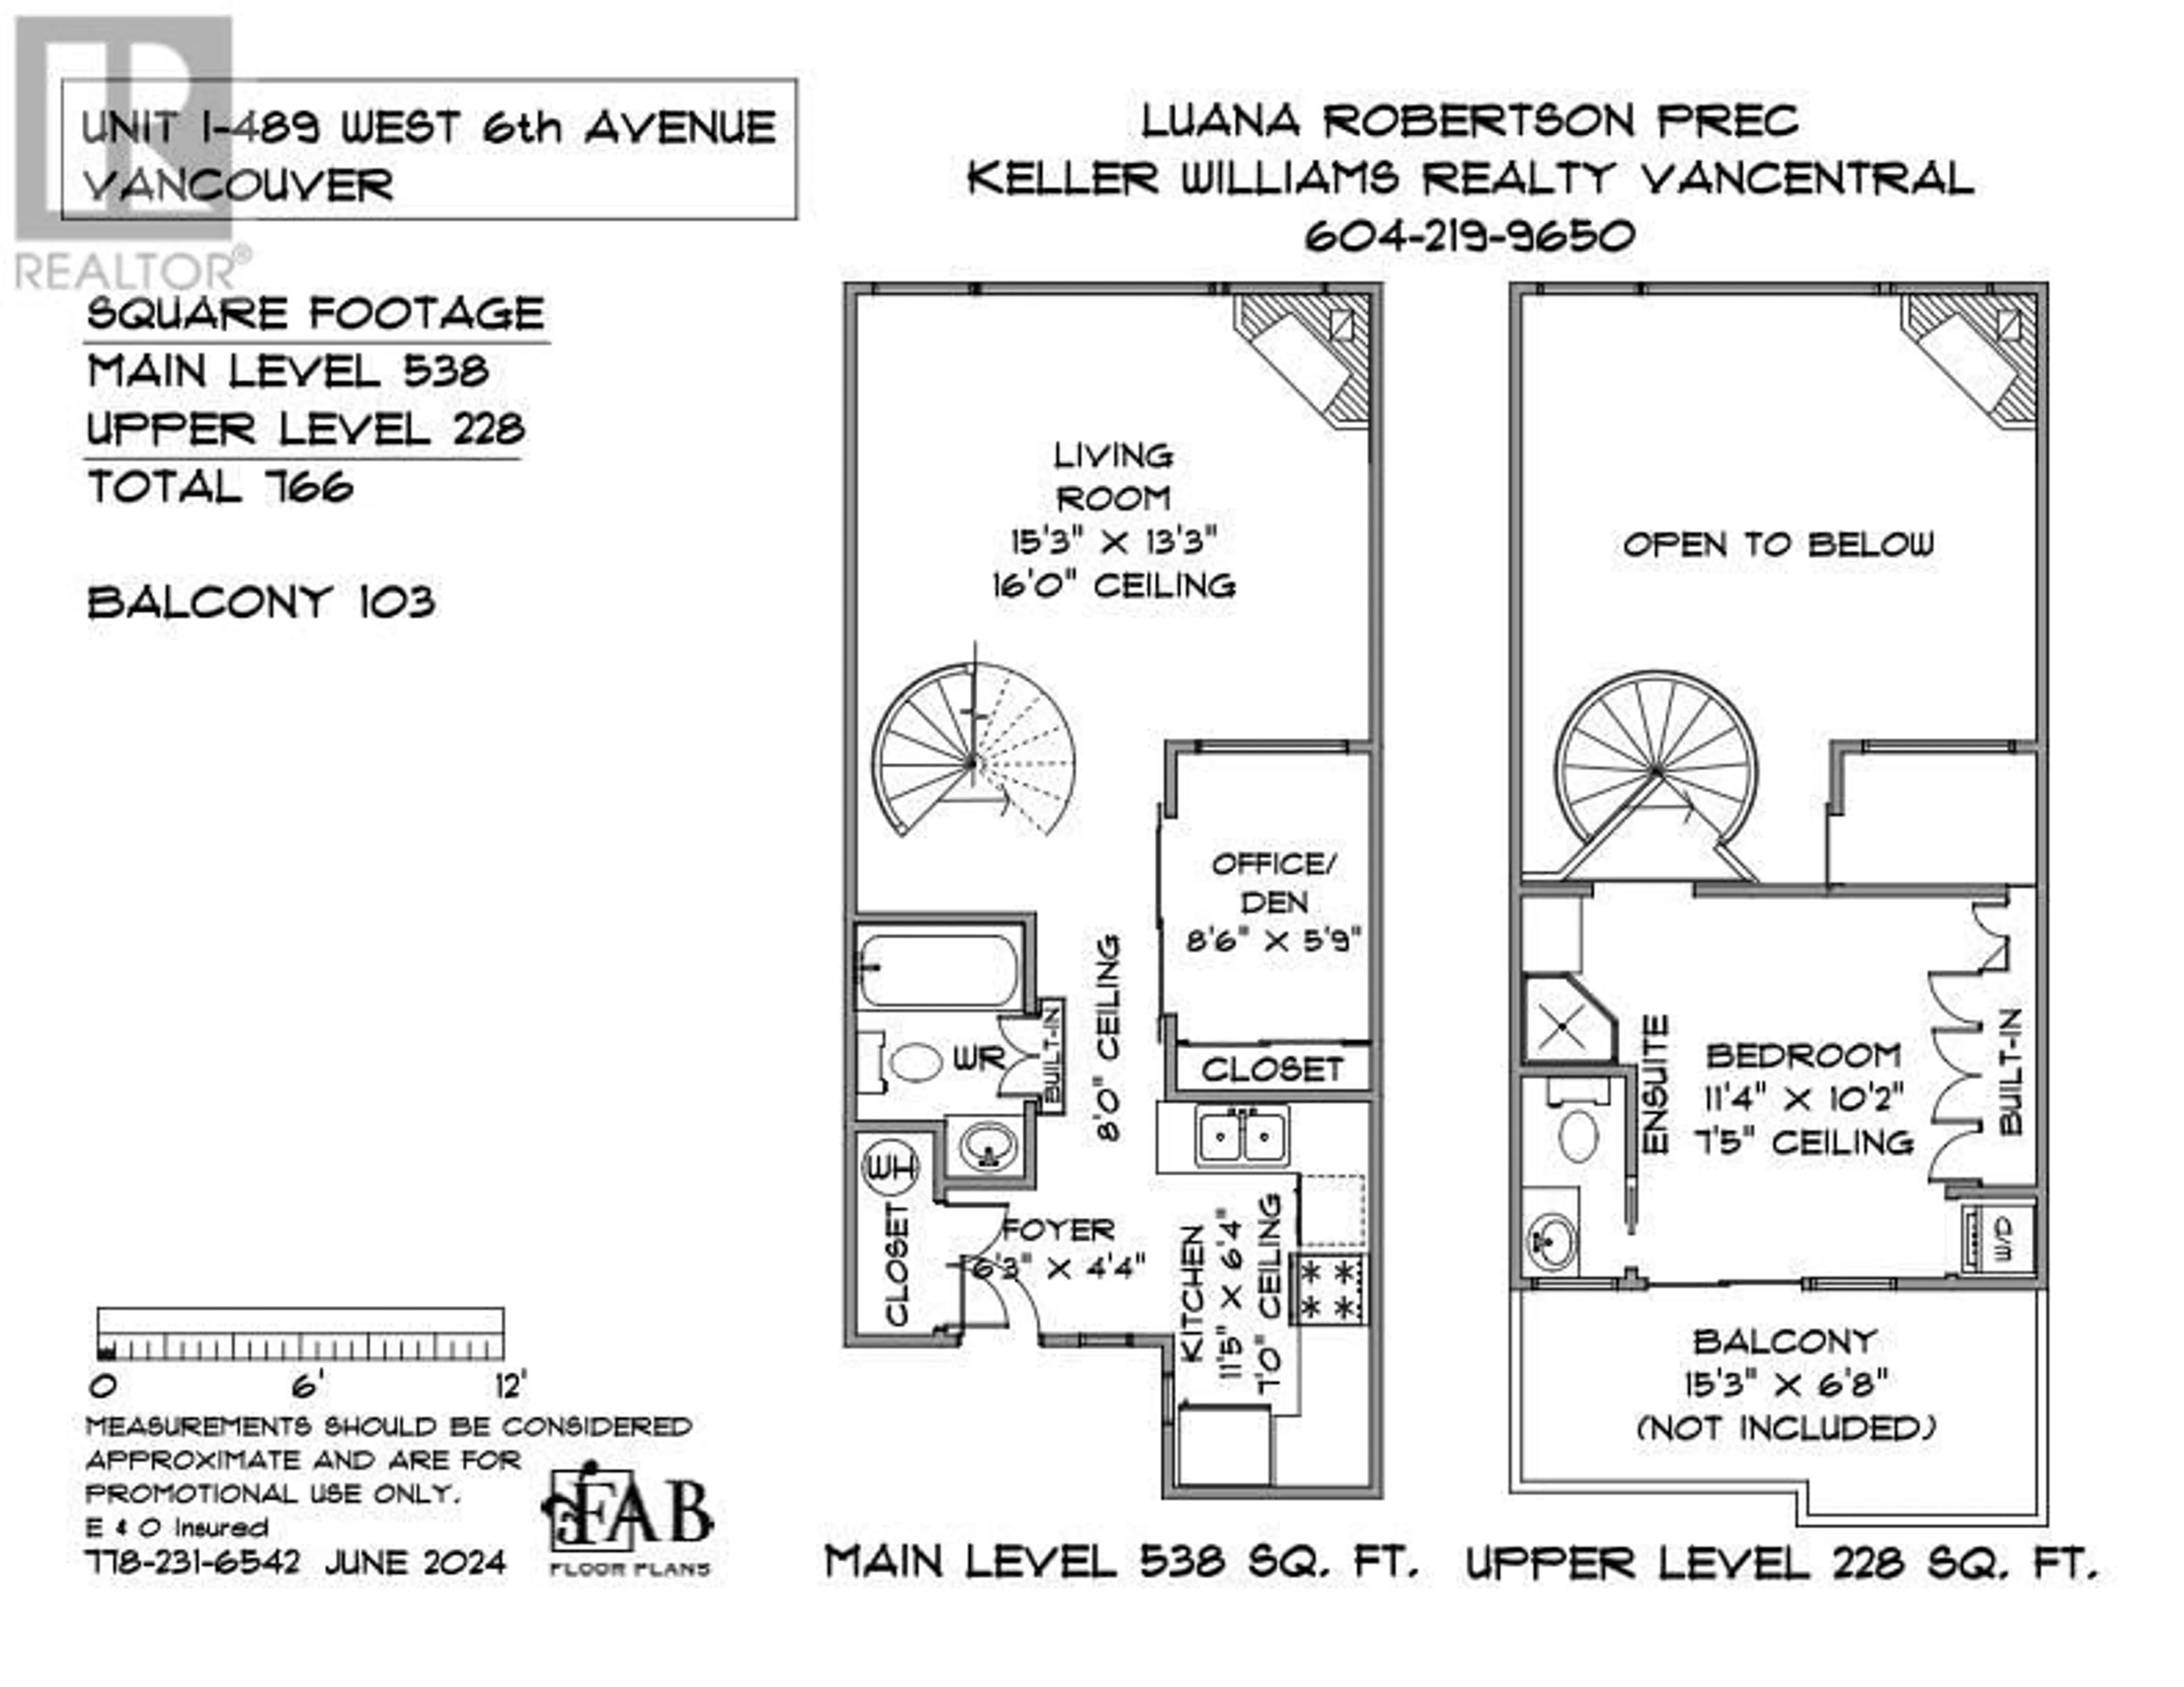 Floor plan for I 489 W 6TH AVENUE, Vancouver British Columbia V5Y1L3